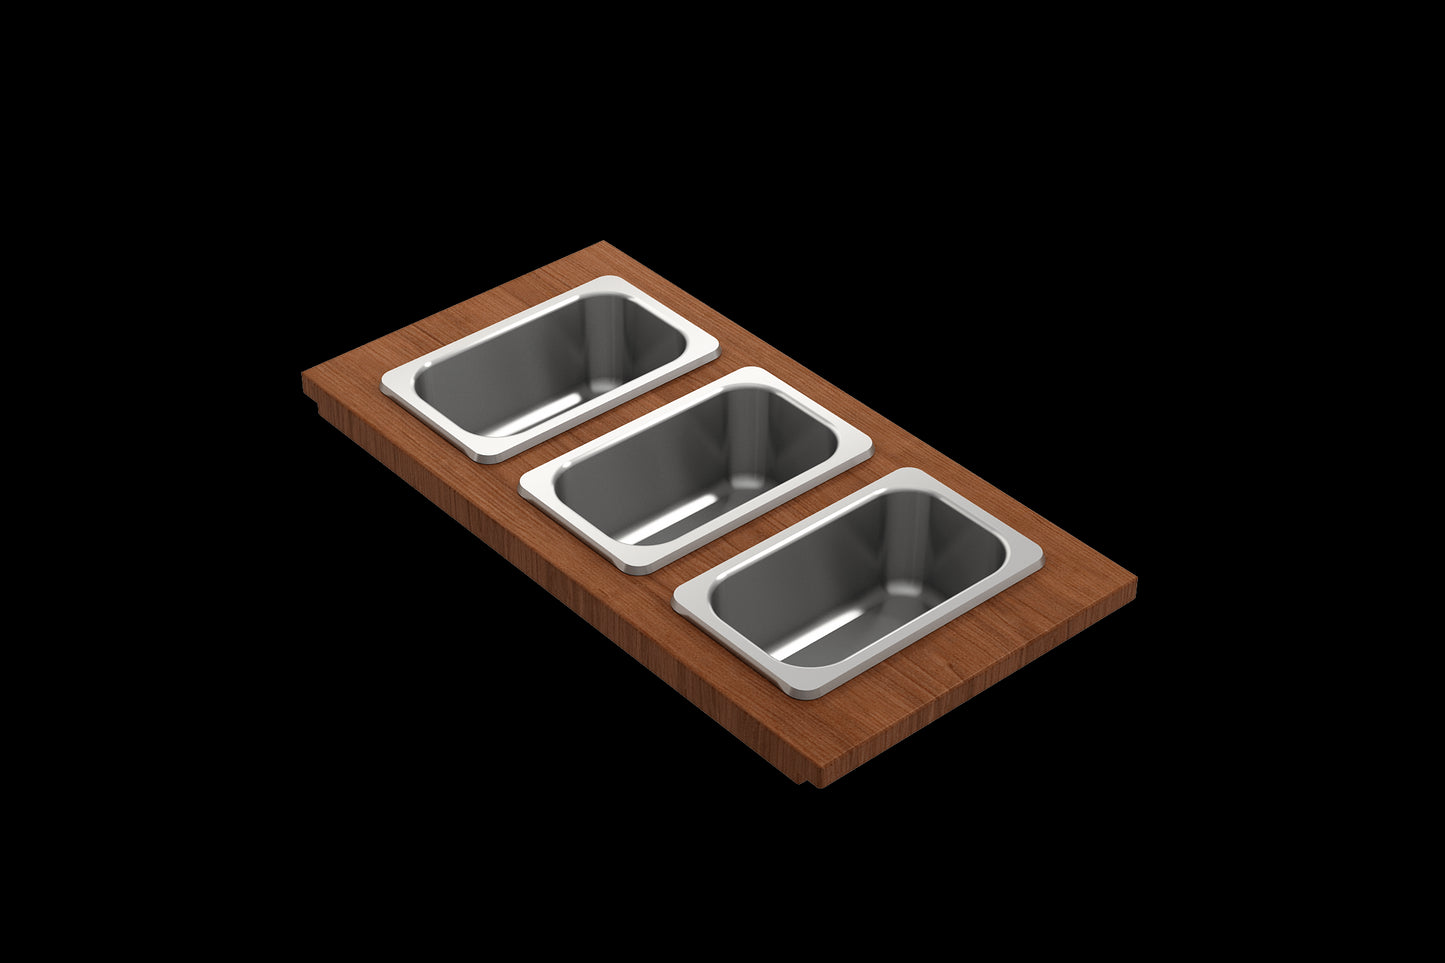 Wood Board with 3 Rectangular Stainless Steel Bowls F/1344, 1348, 1360, 1362, 1504, 1505, 1506 (short side only), 1627, 1628